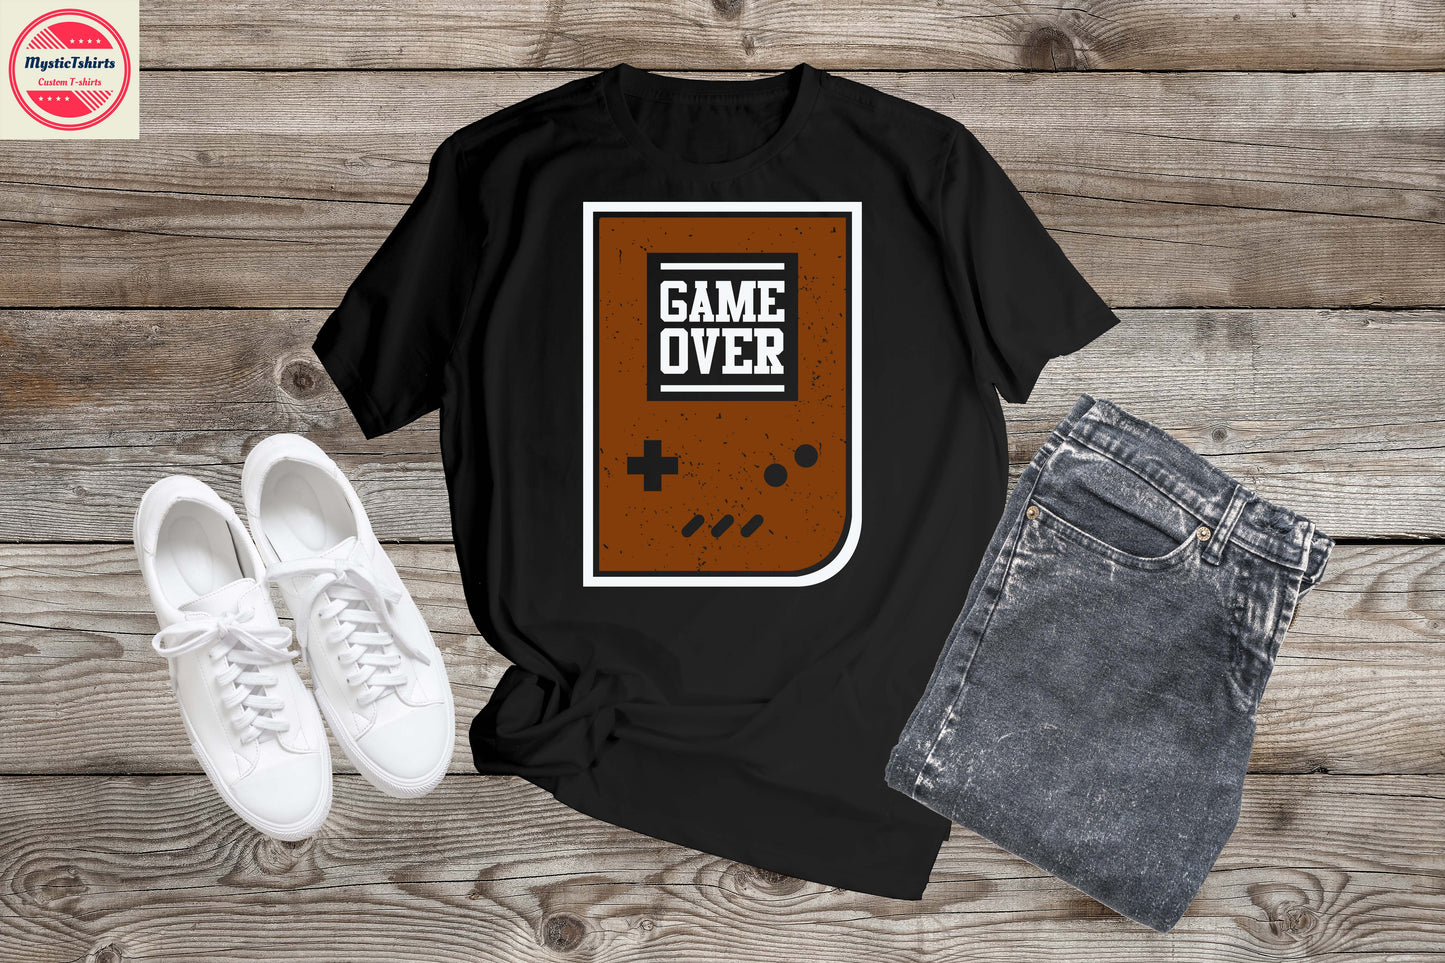 166. GAME OVER, Custom Made Shirt, Personalized T-Shirt, Custom Text, Make Your Own Shirt, Custom Tee